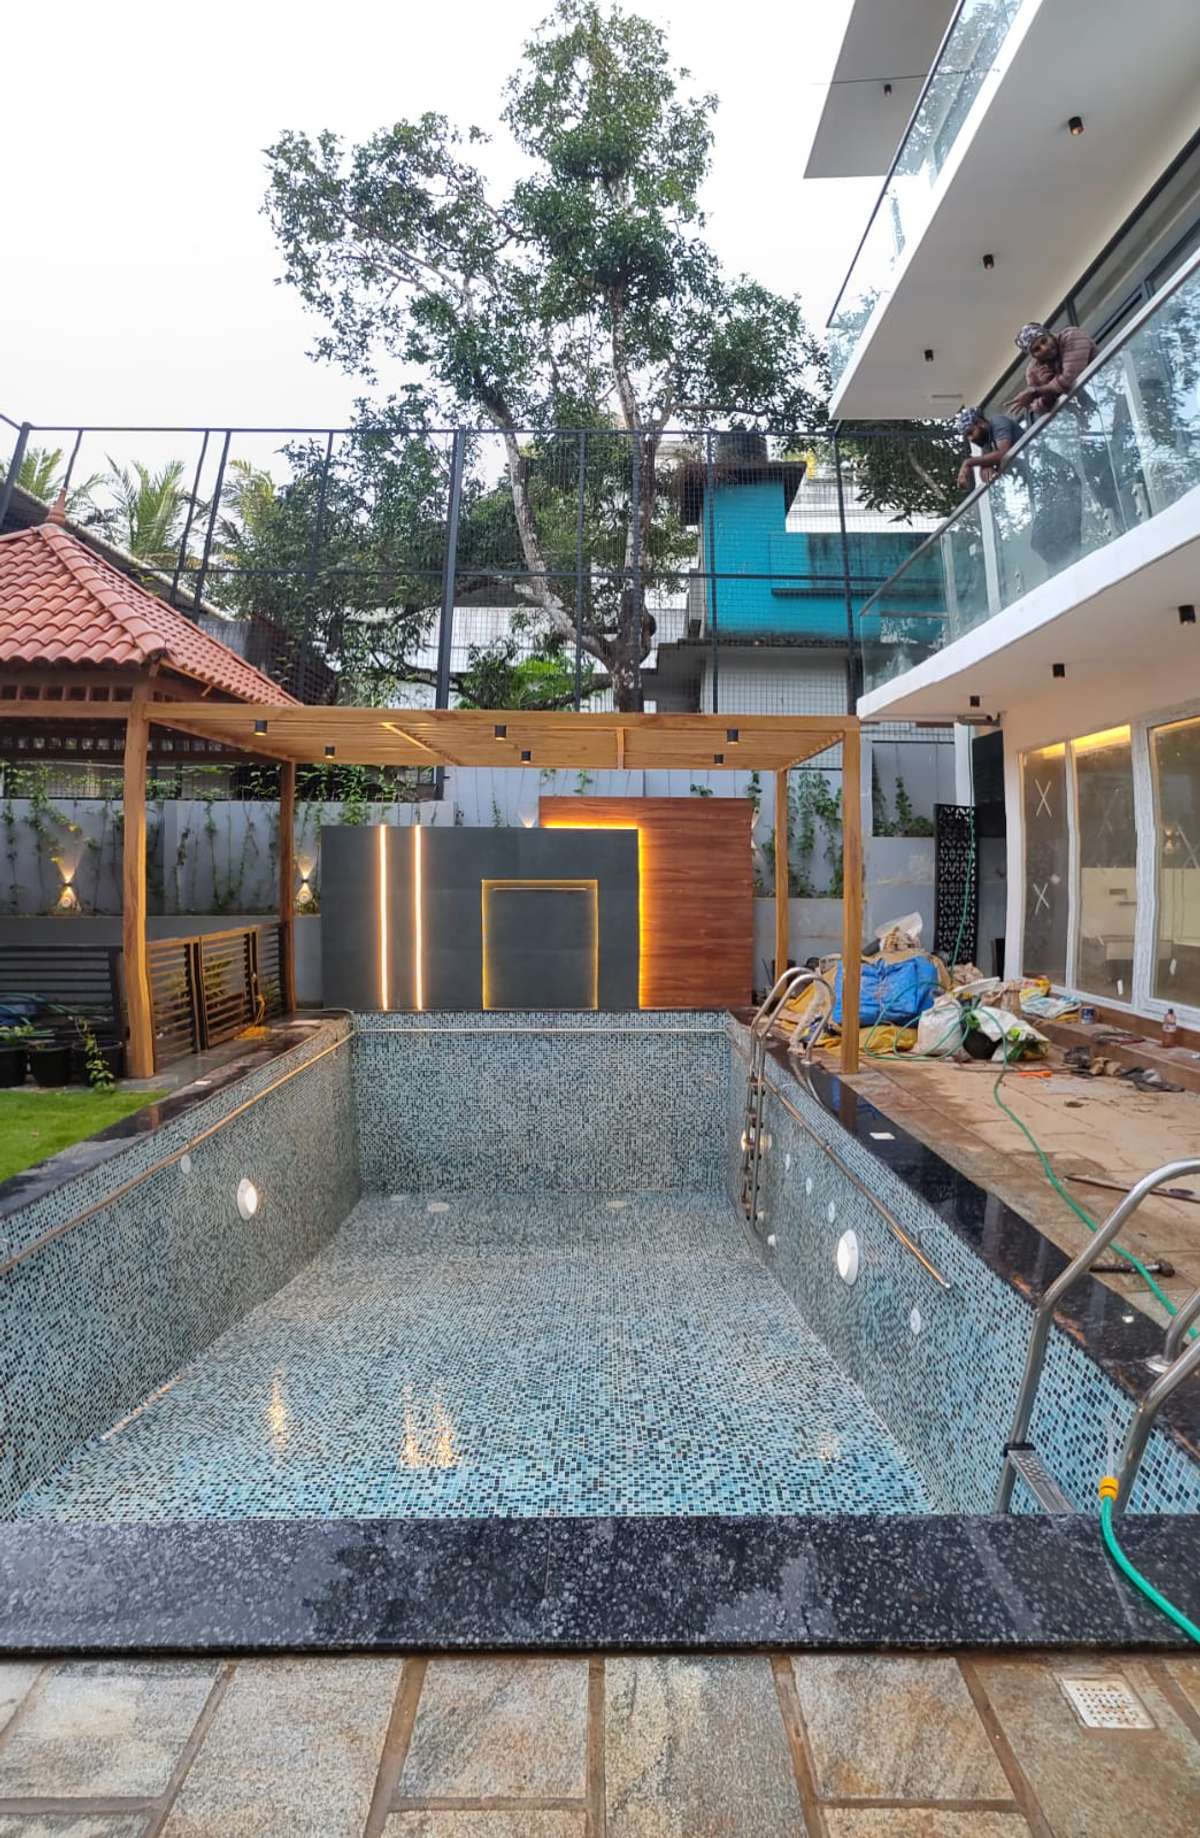 Designs by Swimming Pool Work Future Tech Swimming Pool, Thrissur | Kolo